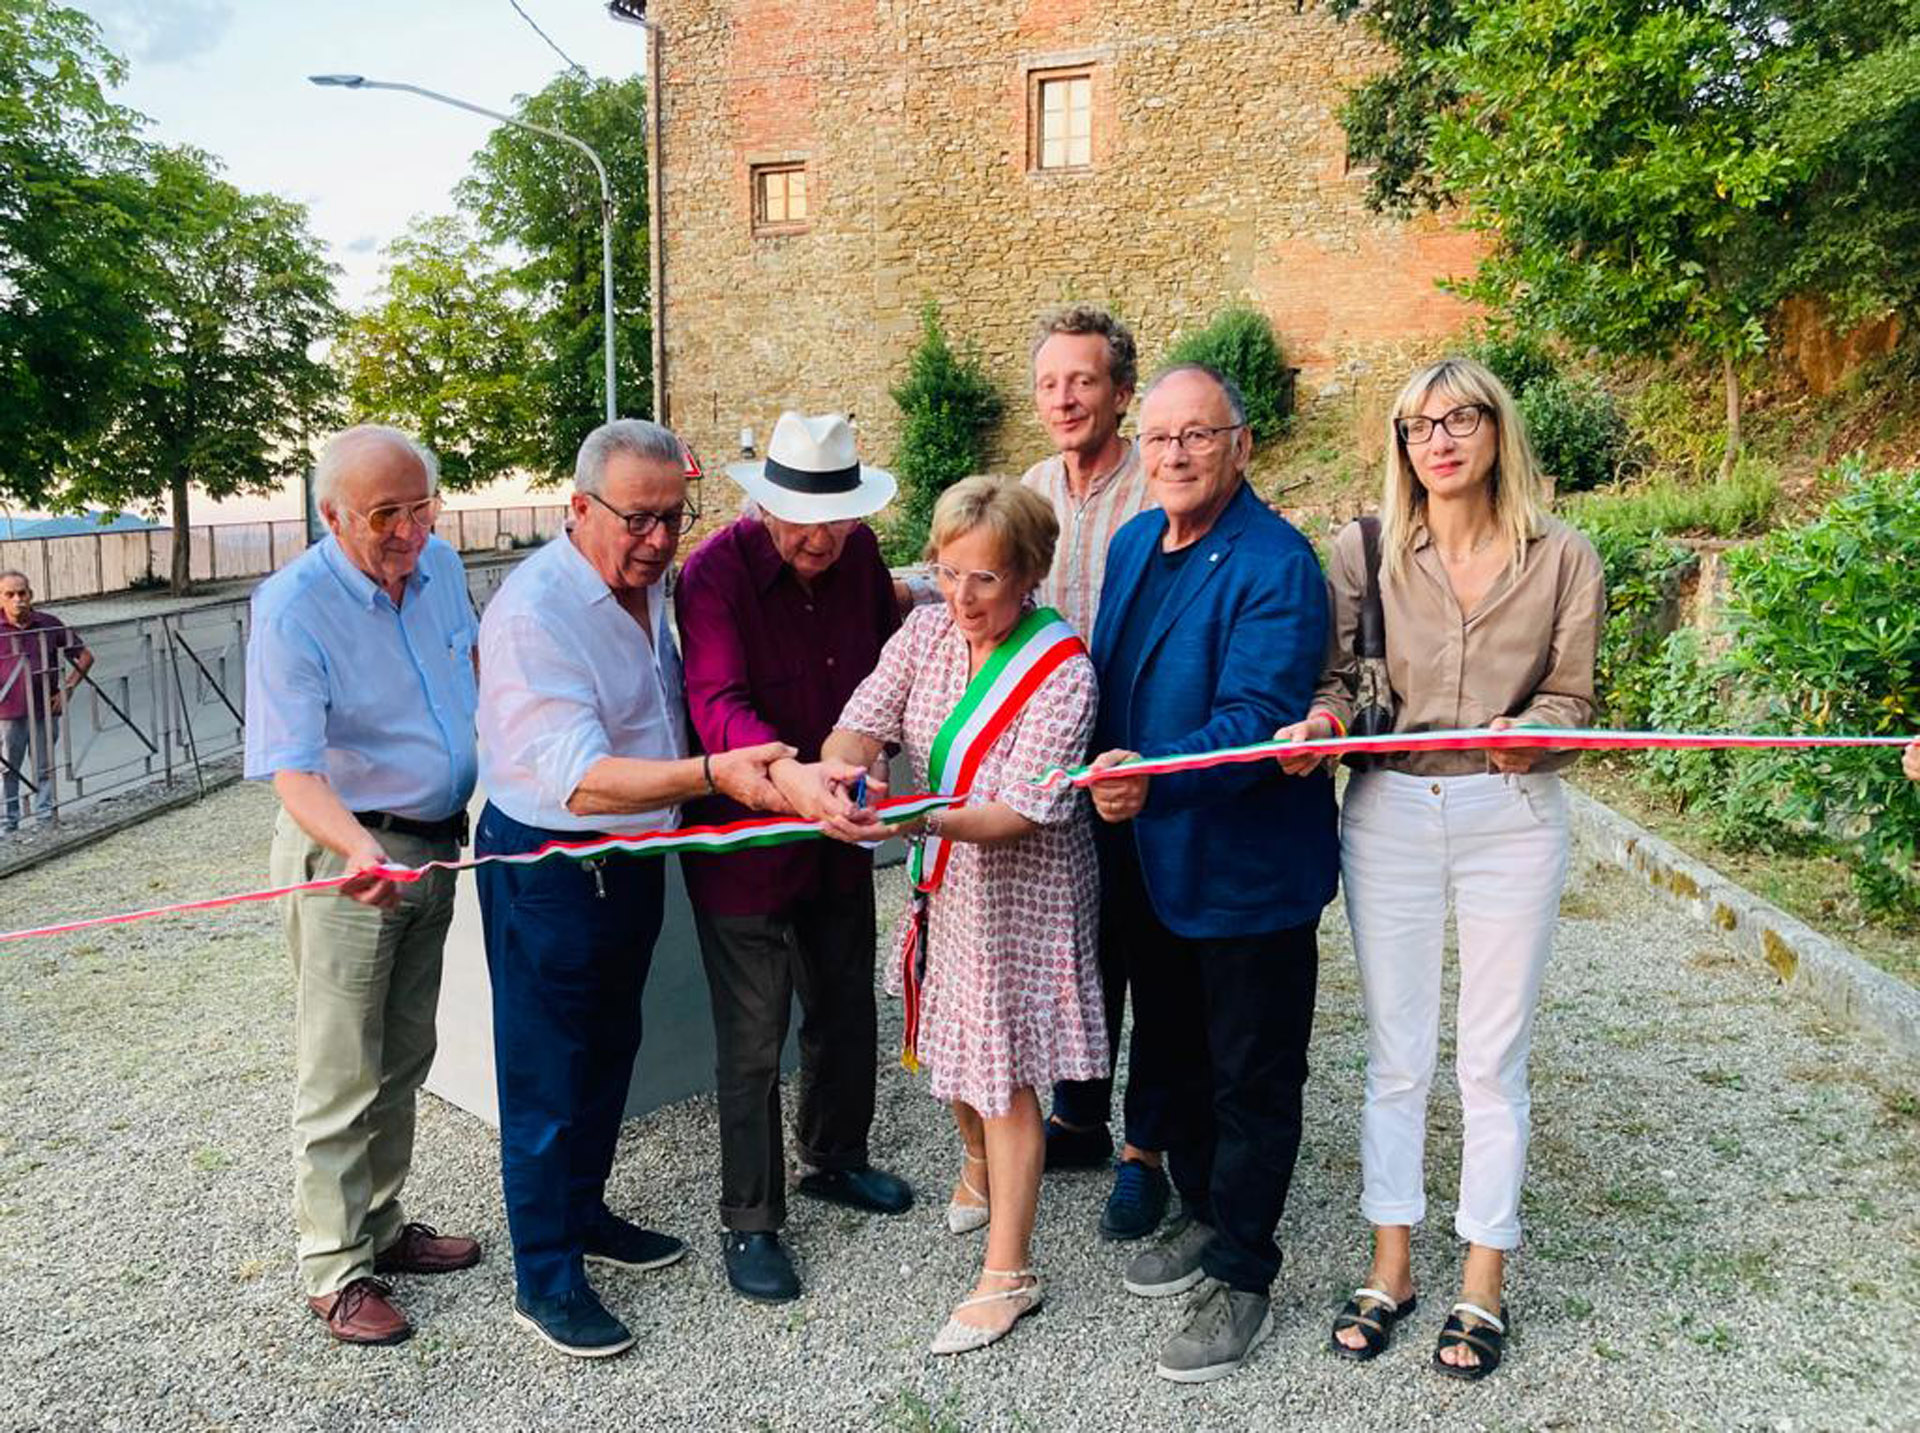 Inauguration of the environmental public sculpture “Cristalli in formazione”, Panicale, Italy. August 11, 2023.